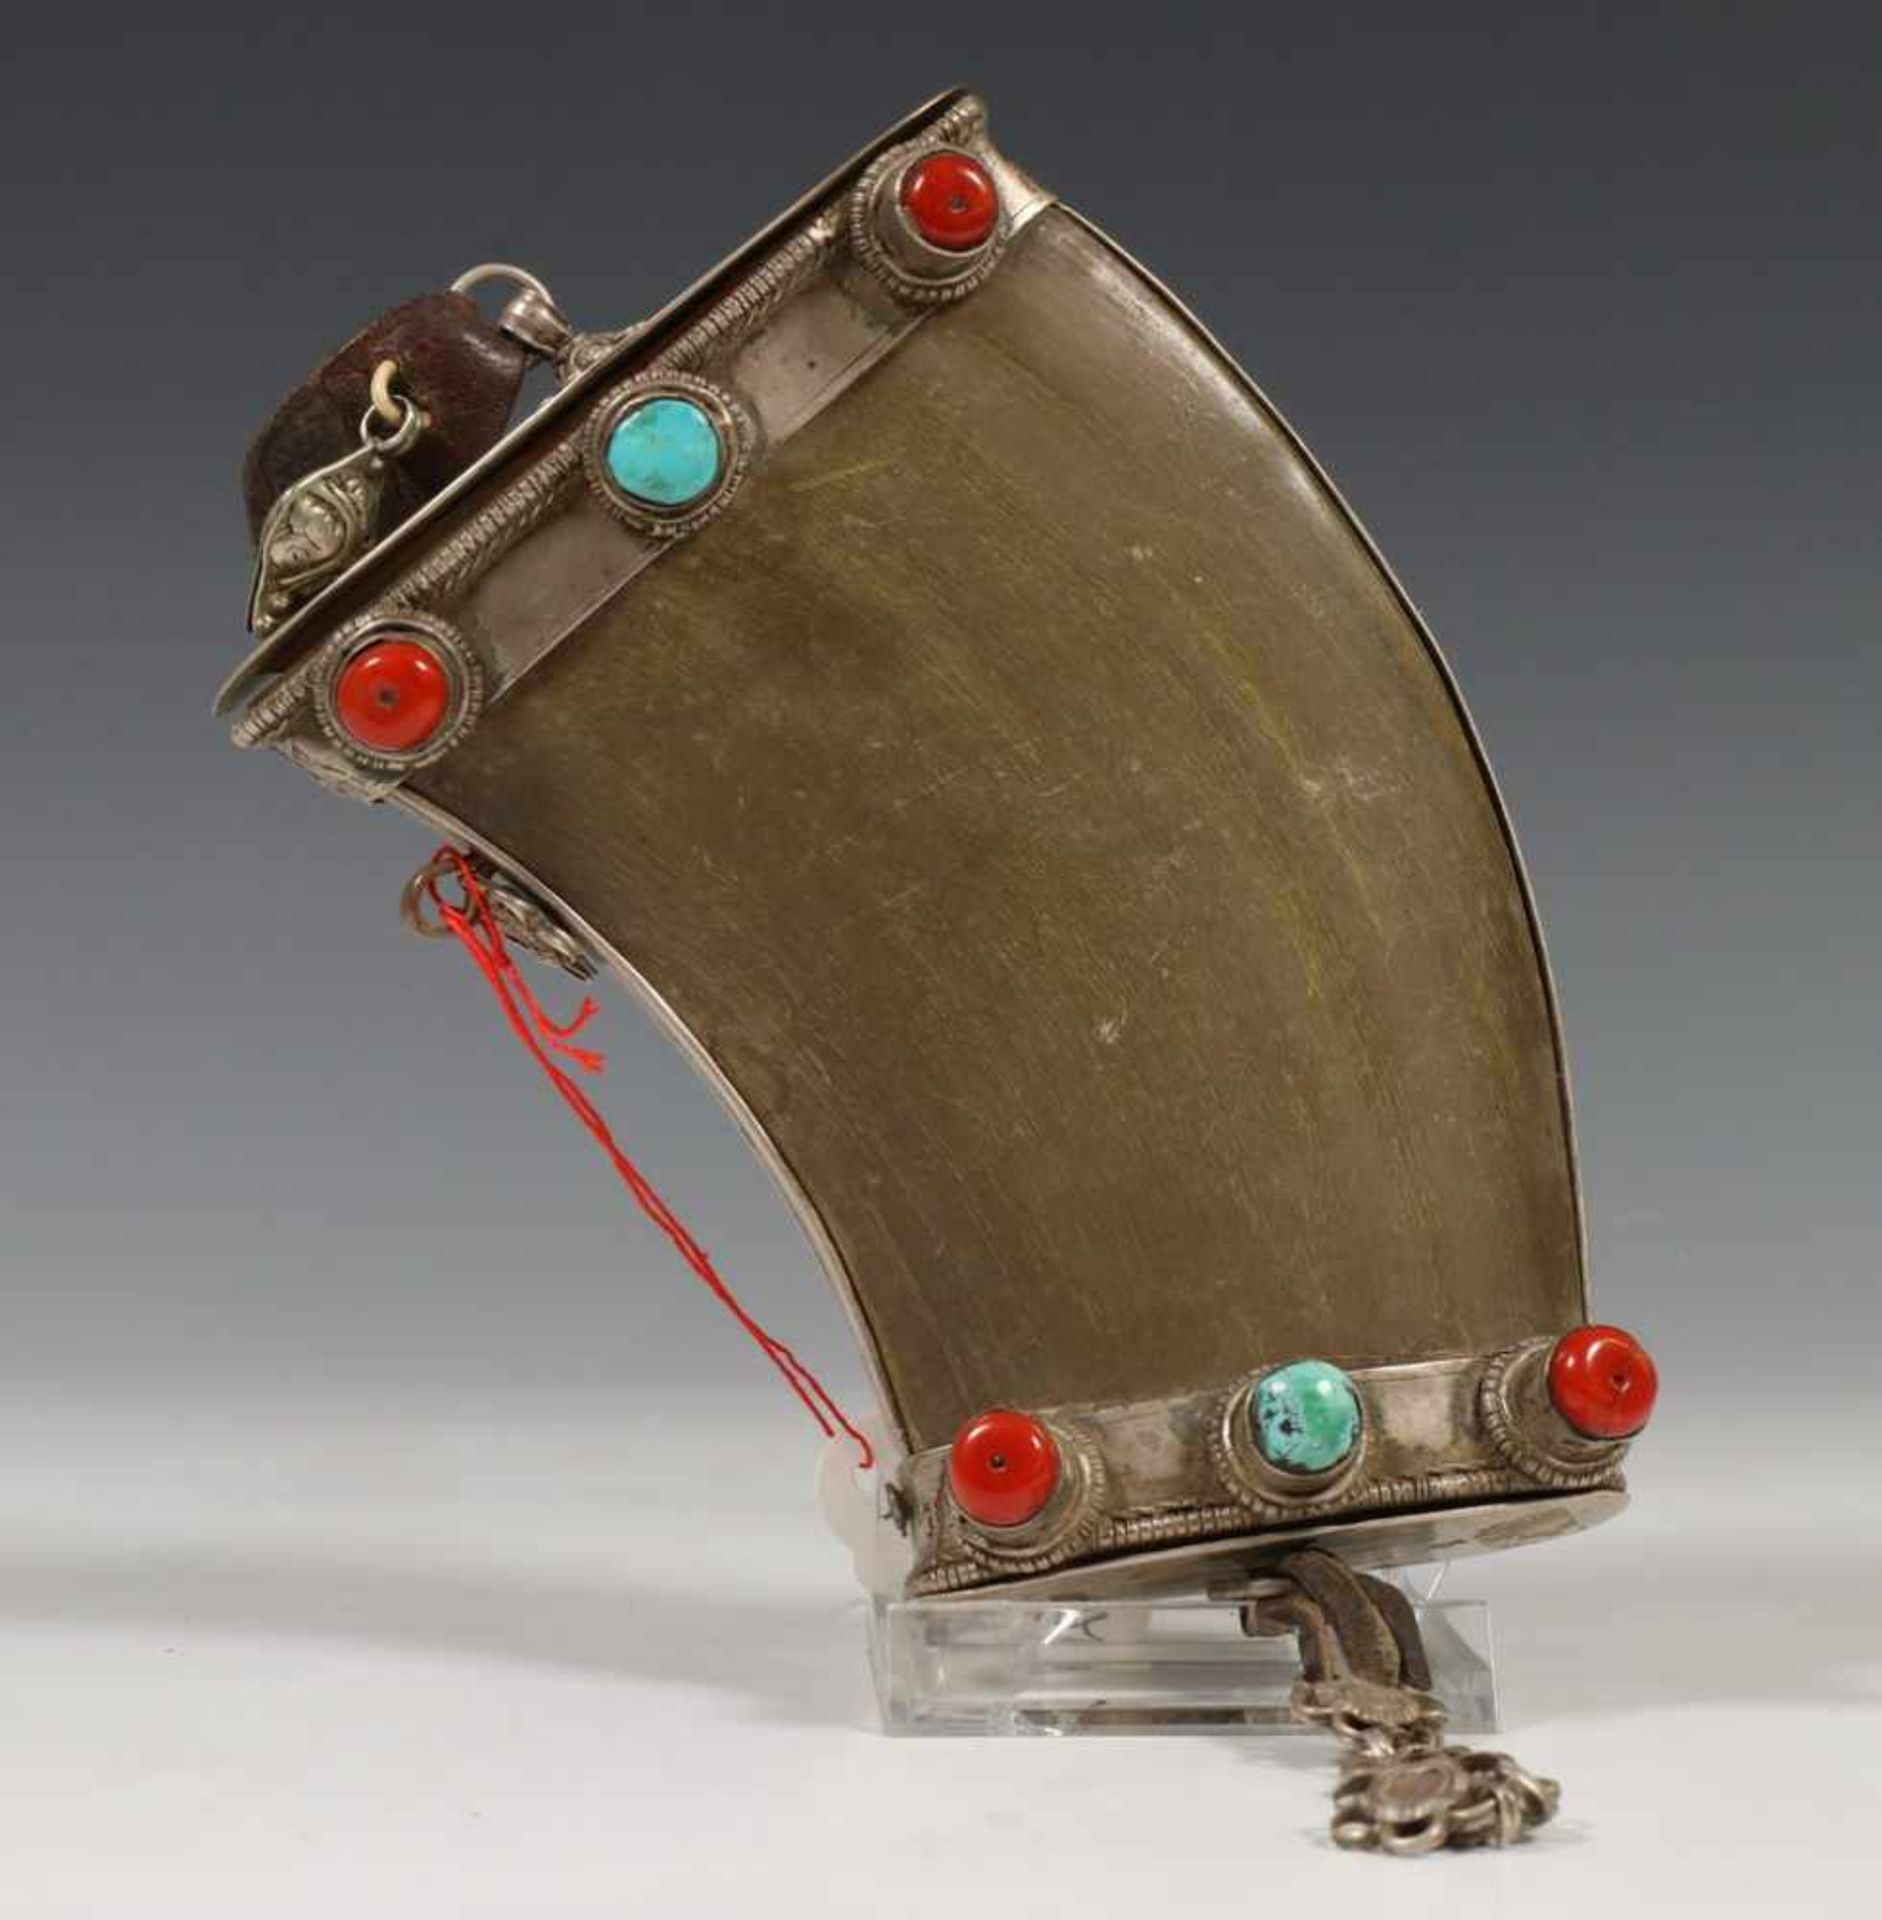 Tibet, powder horn, 19th century. Silver, wood, leather, horn, turquoise and coral.Opens at two